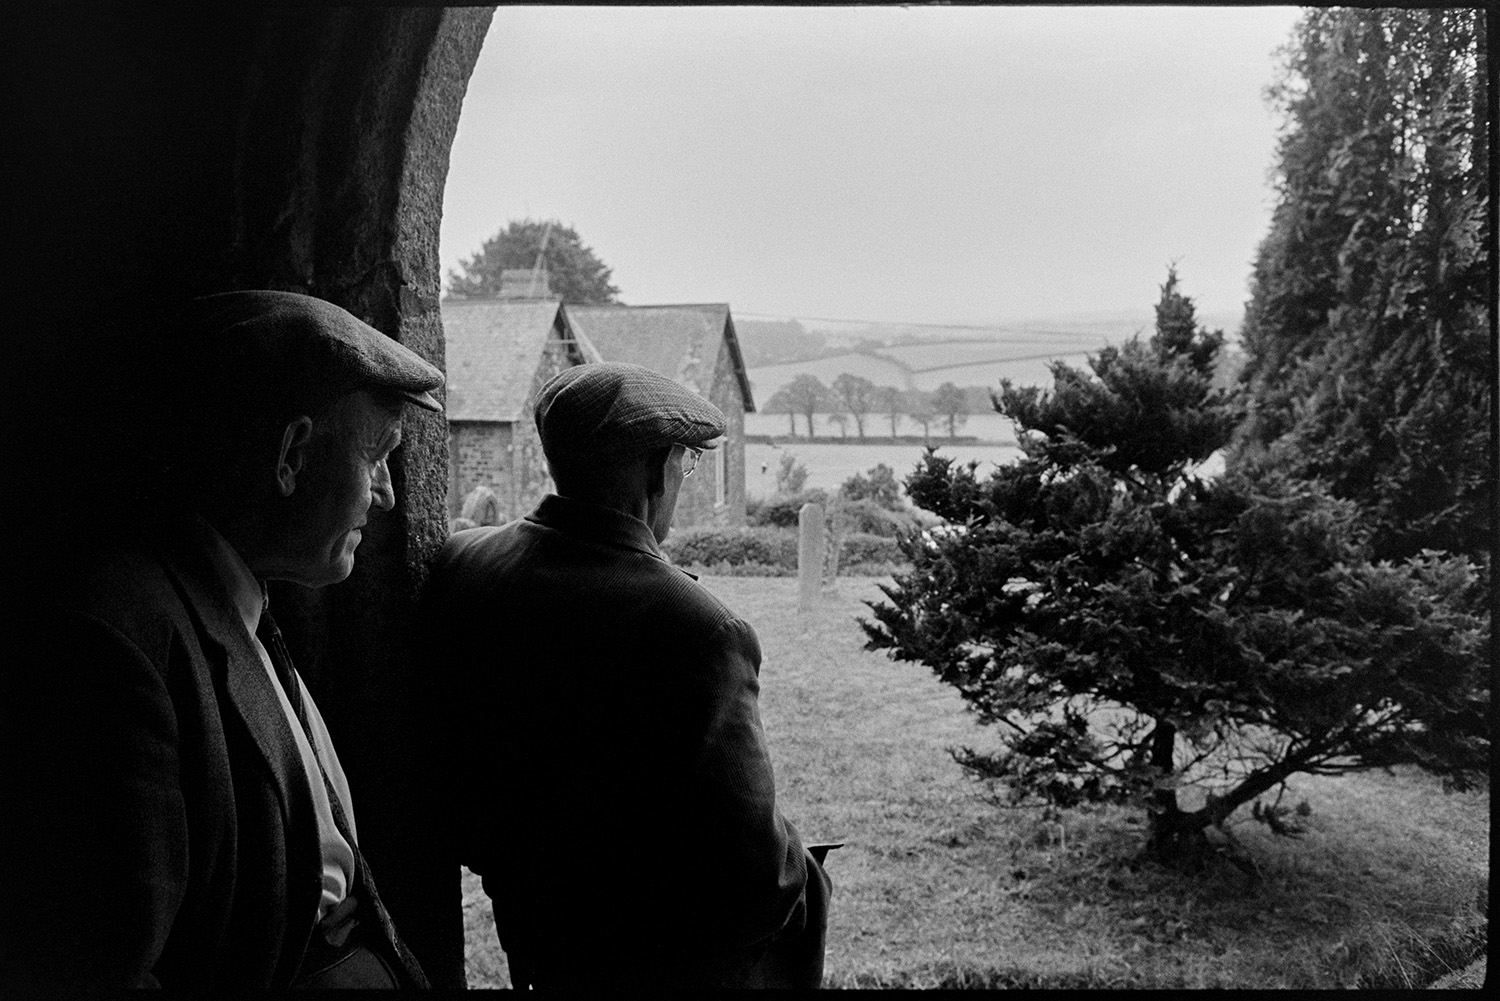 Two men looking from church porch. 
[Two men stood in Iddesleigh Church porch looking out onto the churchyard with gravestones and trees.]